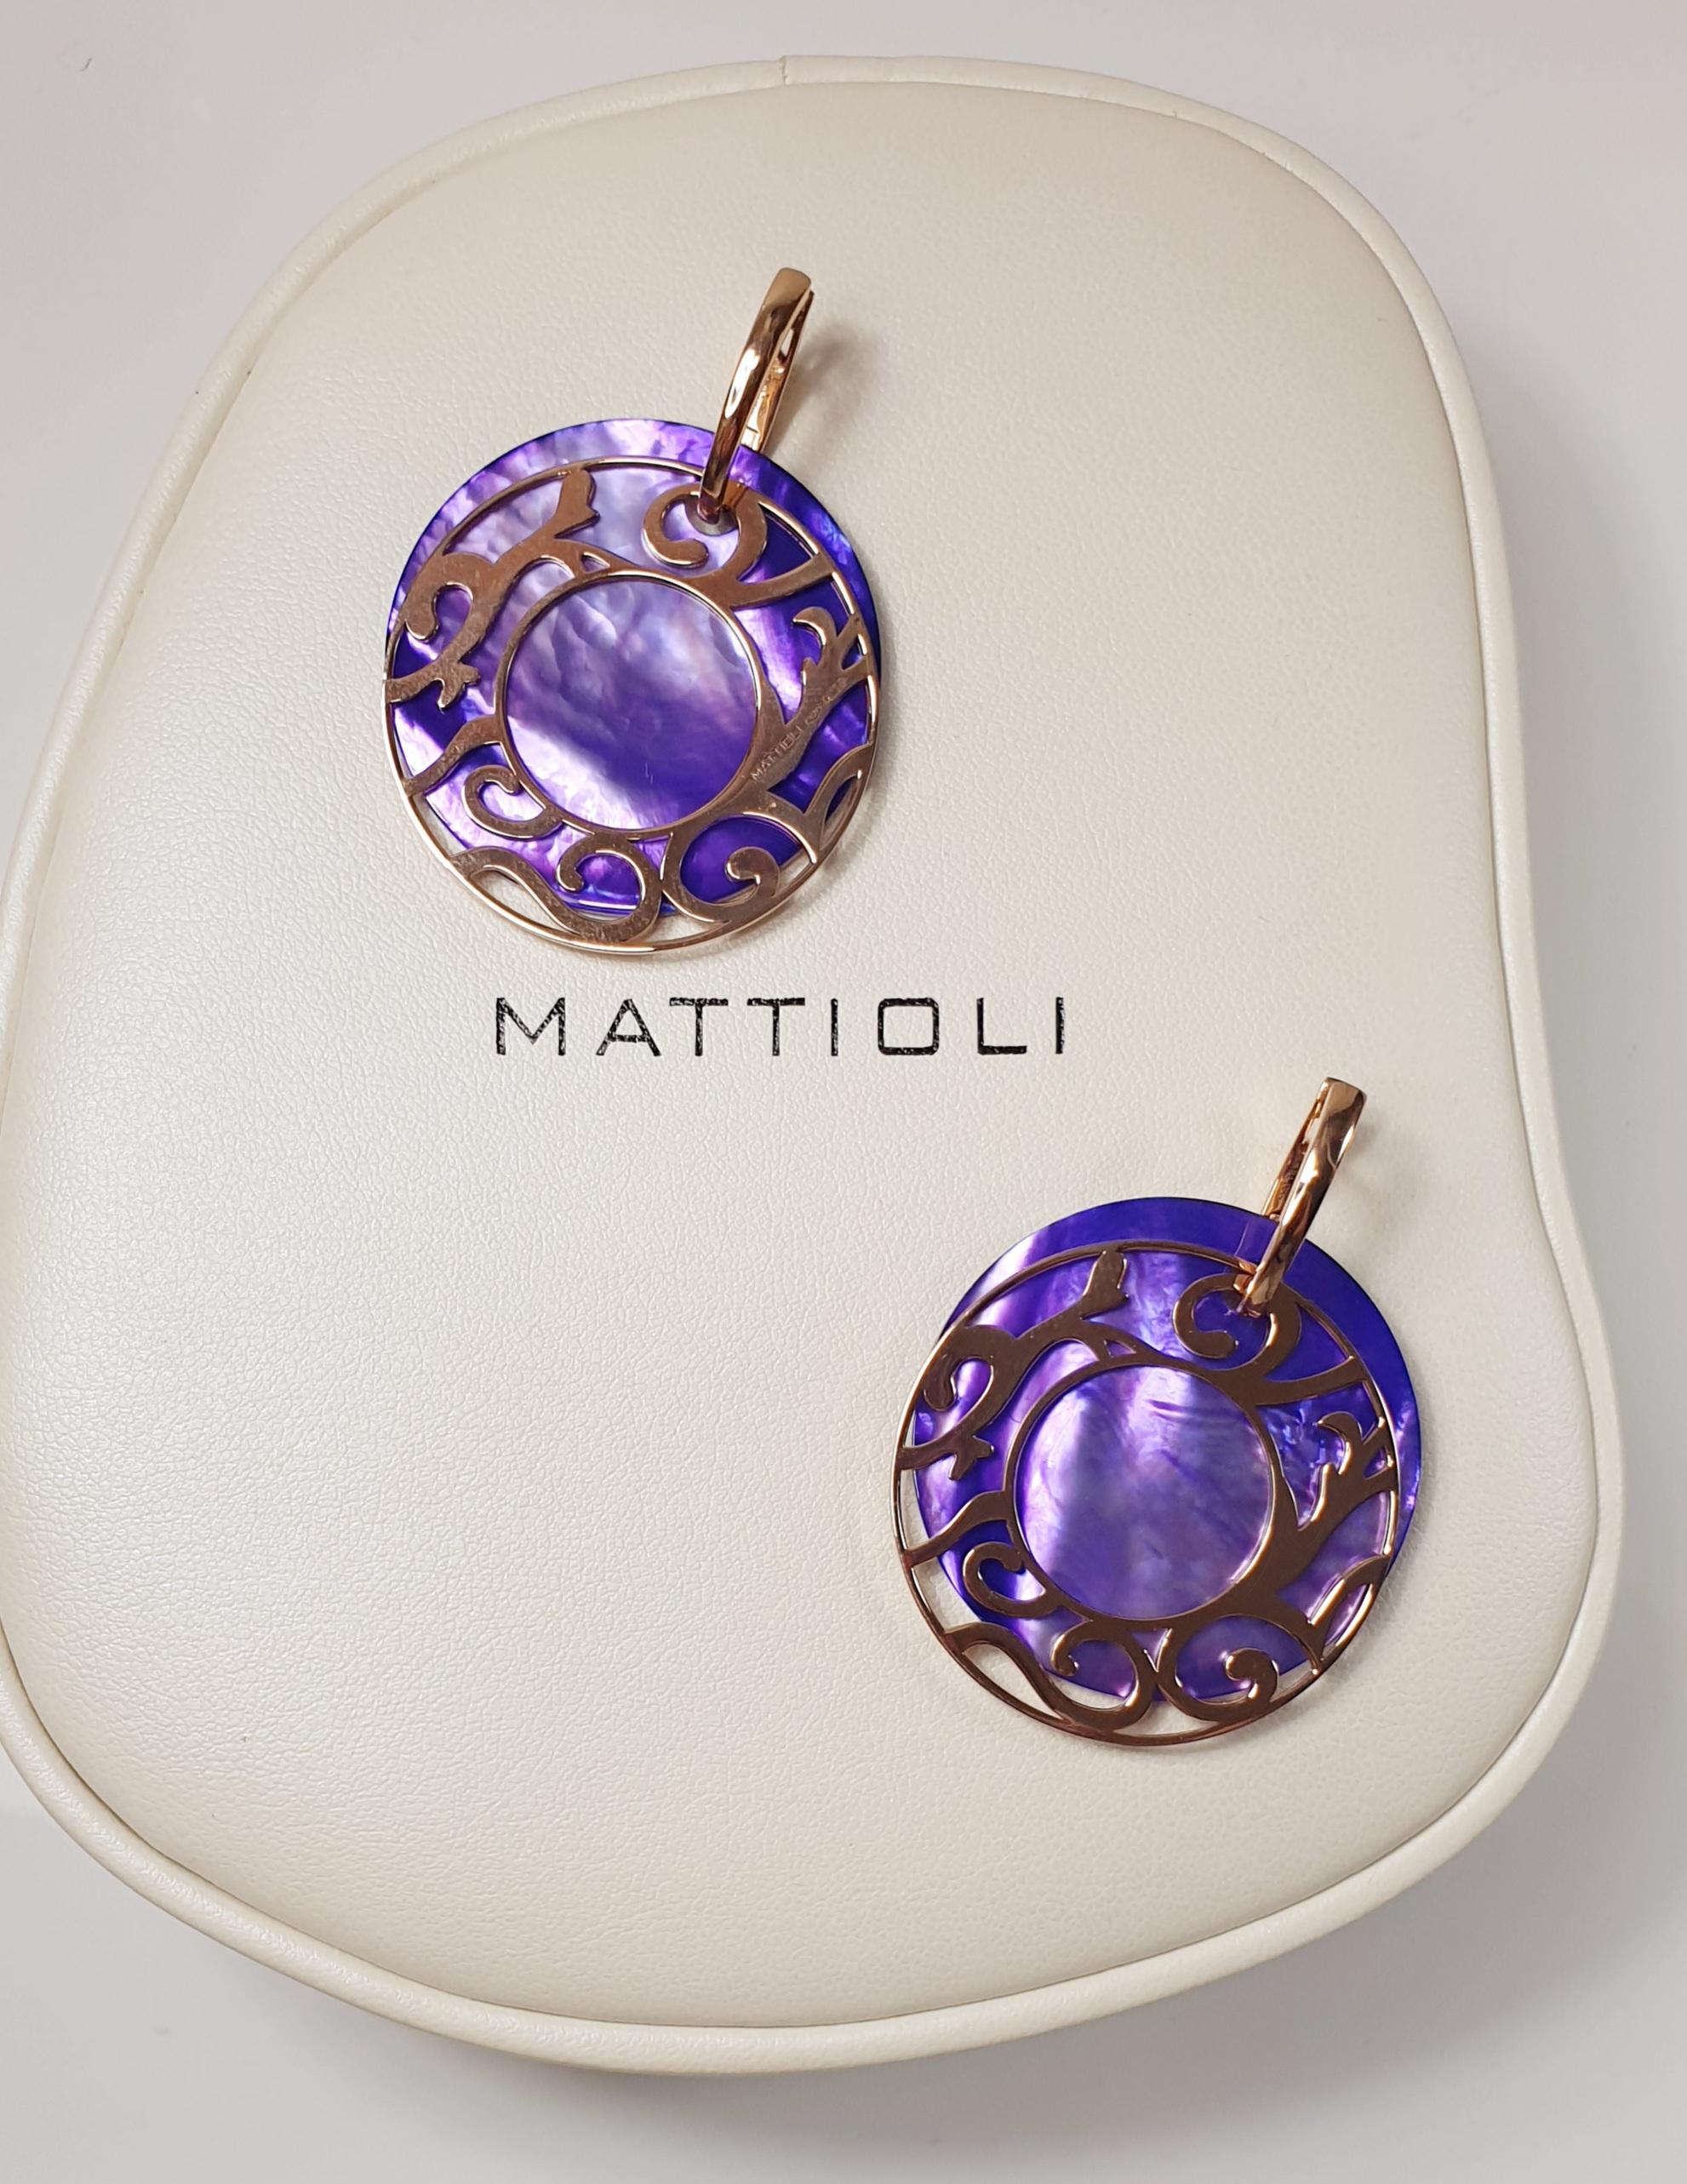 Mattioli Siriana Earrings Medium in 18k Gold & 3 Mother of Pearl Pieces For Sale 4